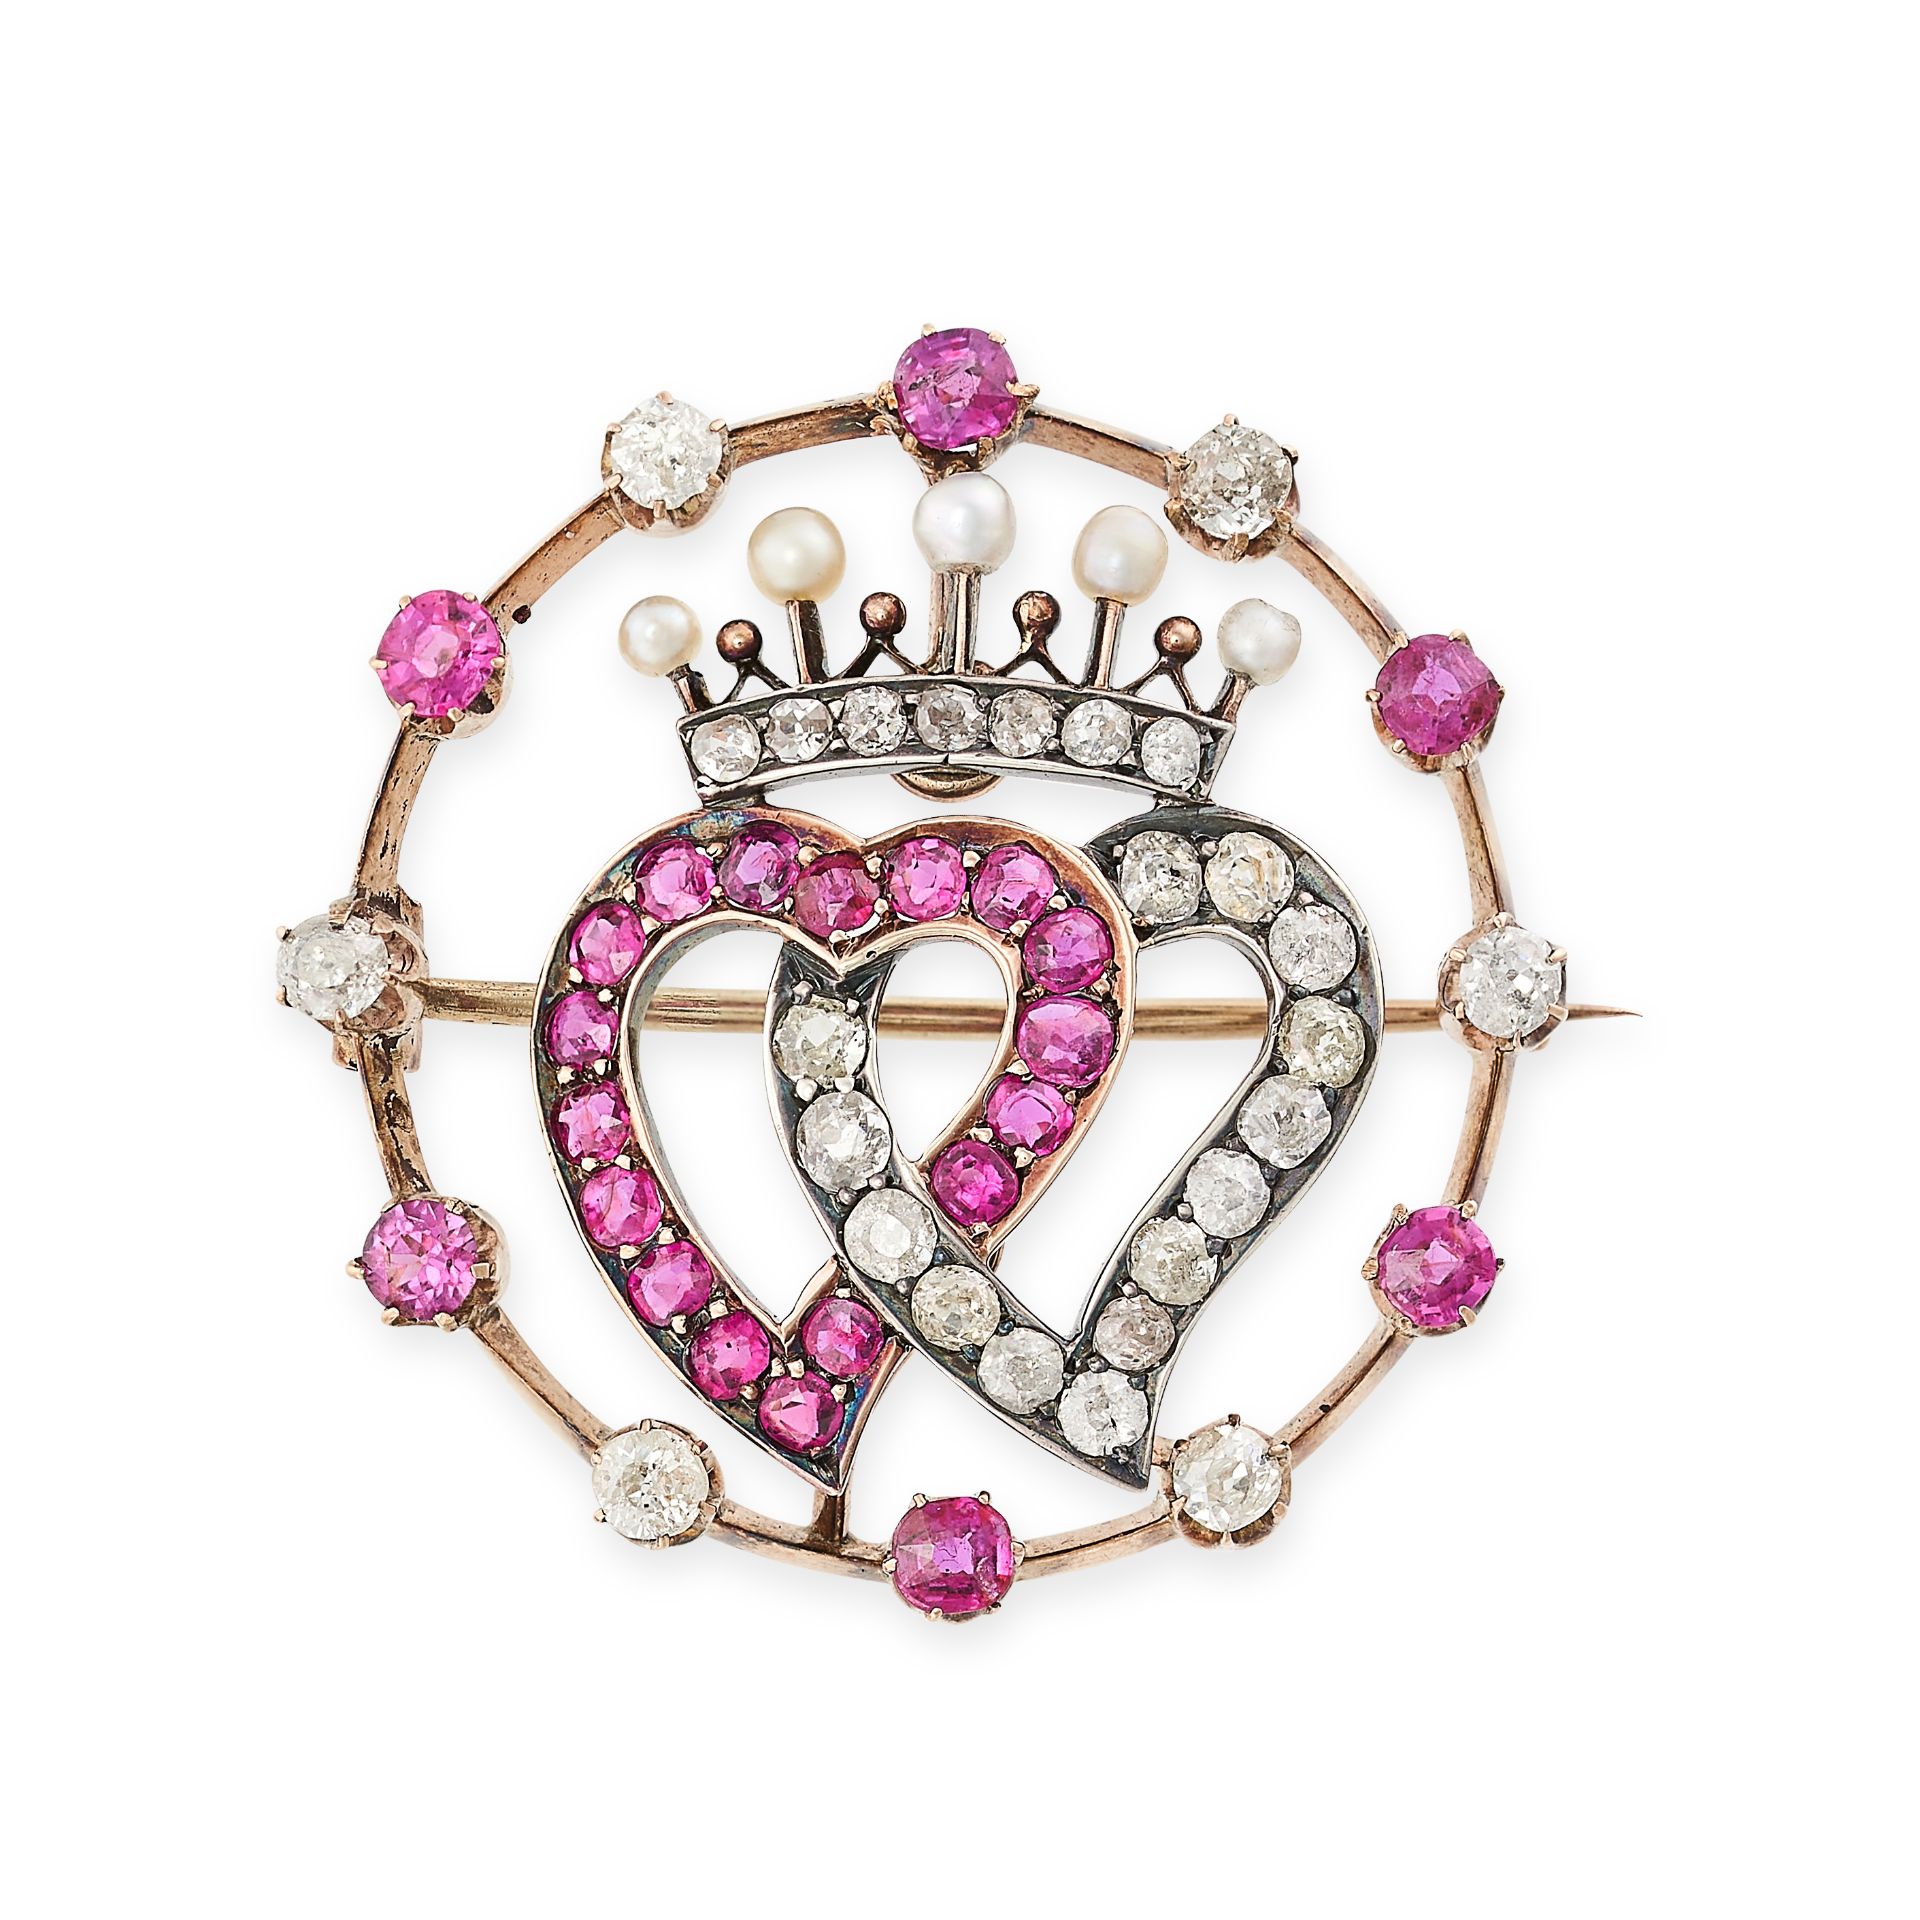 A RUBY AND DIAMOND SWEETHEART BROOCH comprising two interlocking hearts set with round cut rubies